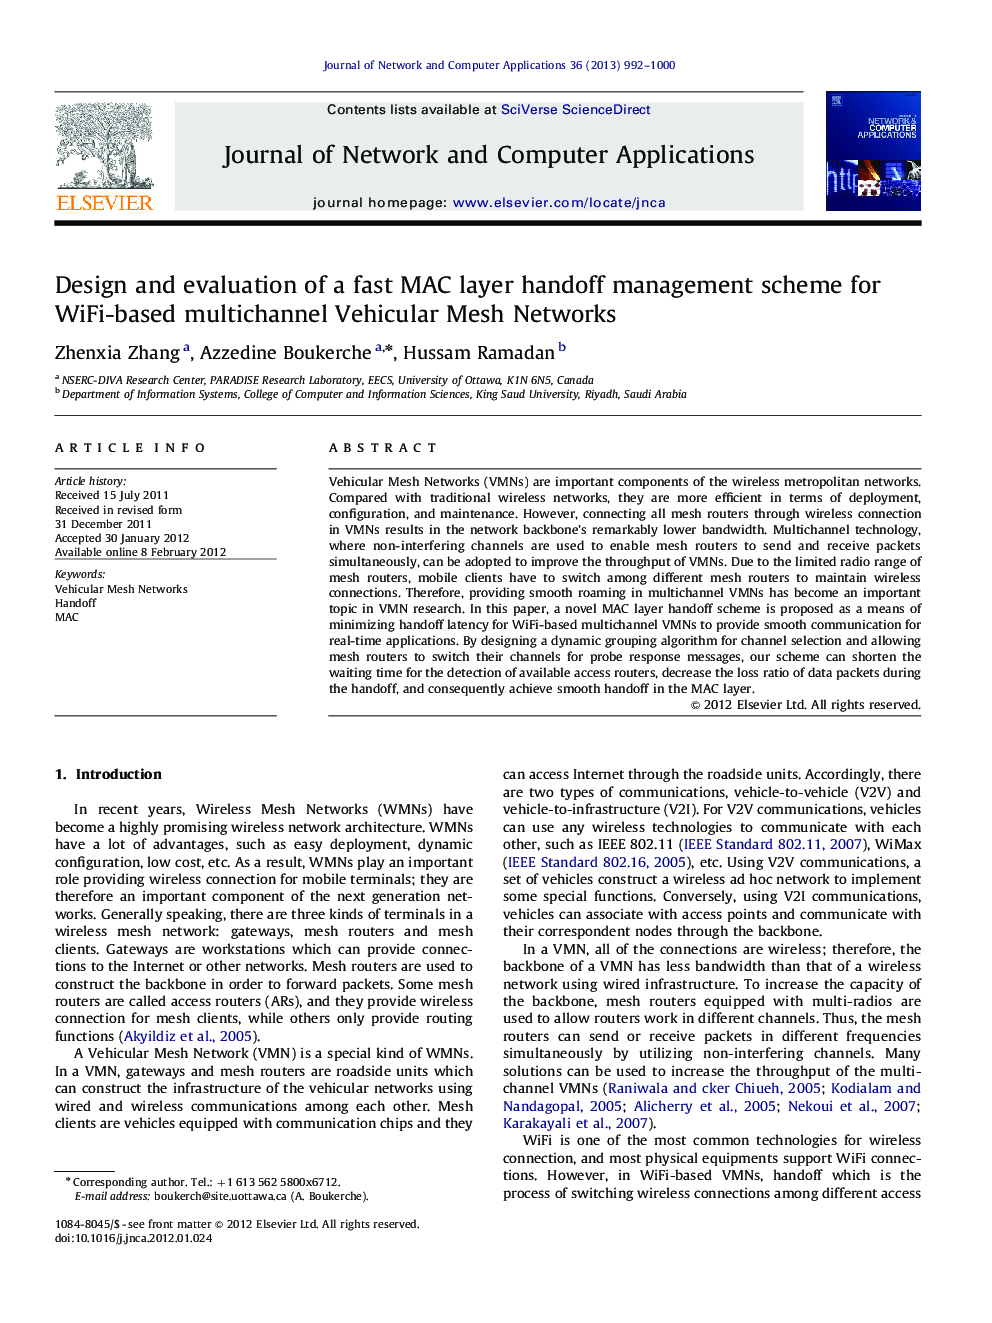 Design and evaluation of a fast MAC layer handoff management scheme for WiFi-based multichannel Vehicular Mesh Networks